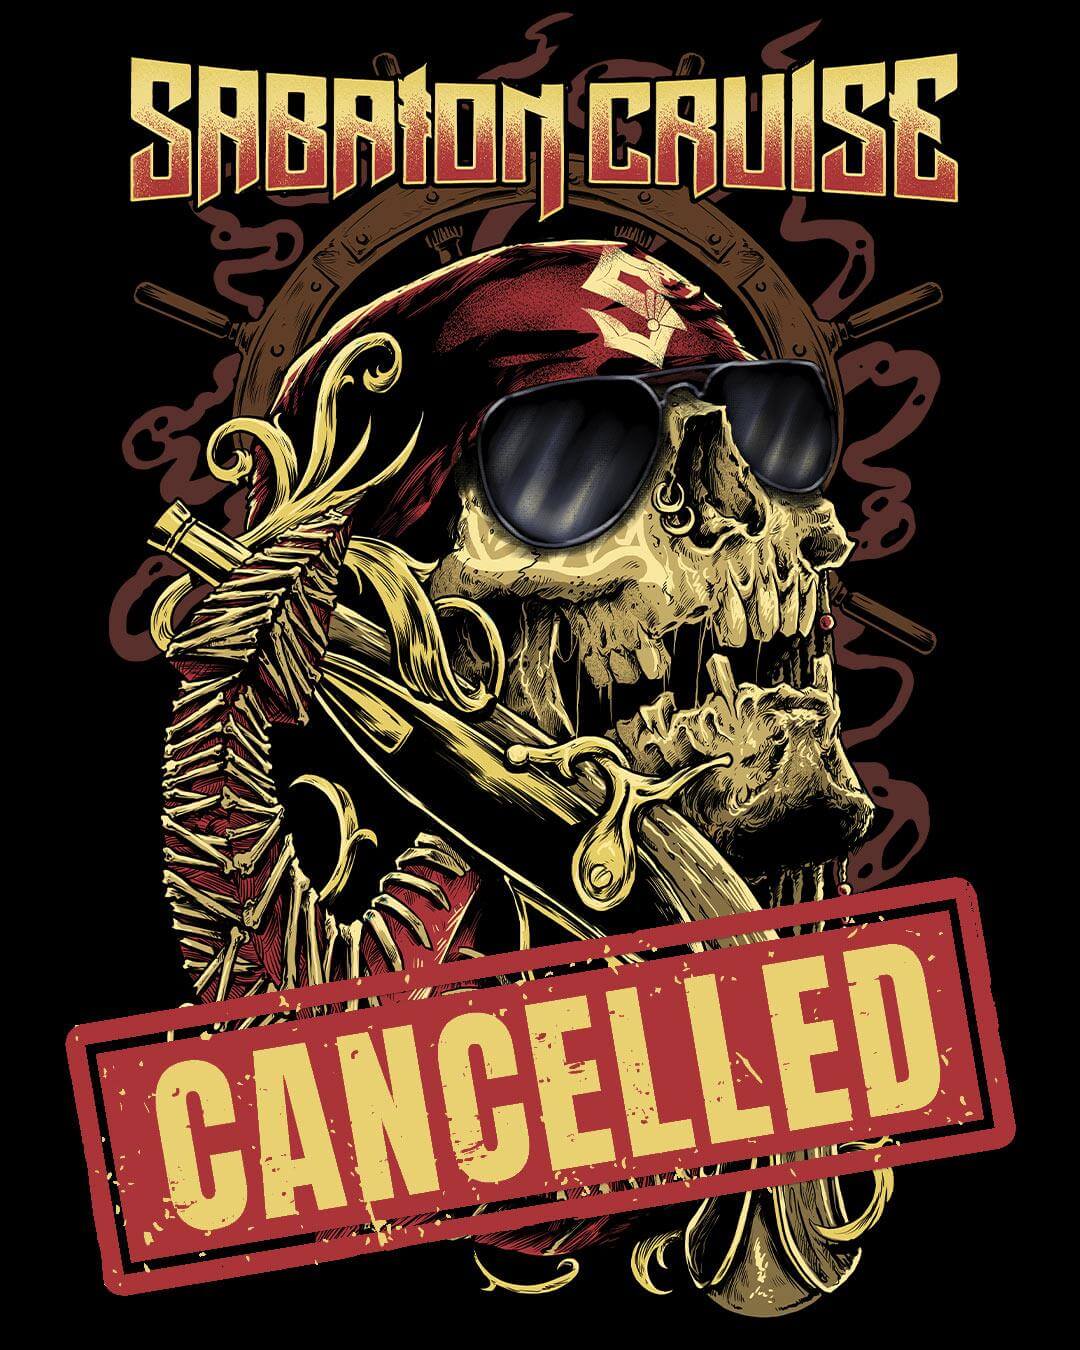 Sabaton Cruise 2020 is cancelled due to the pandemic